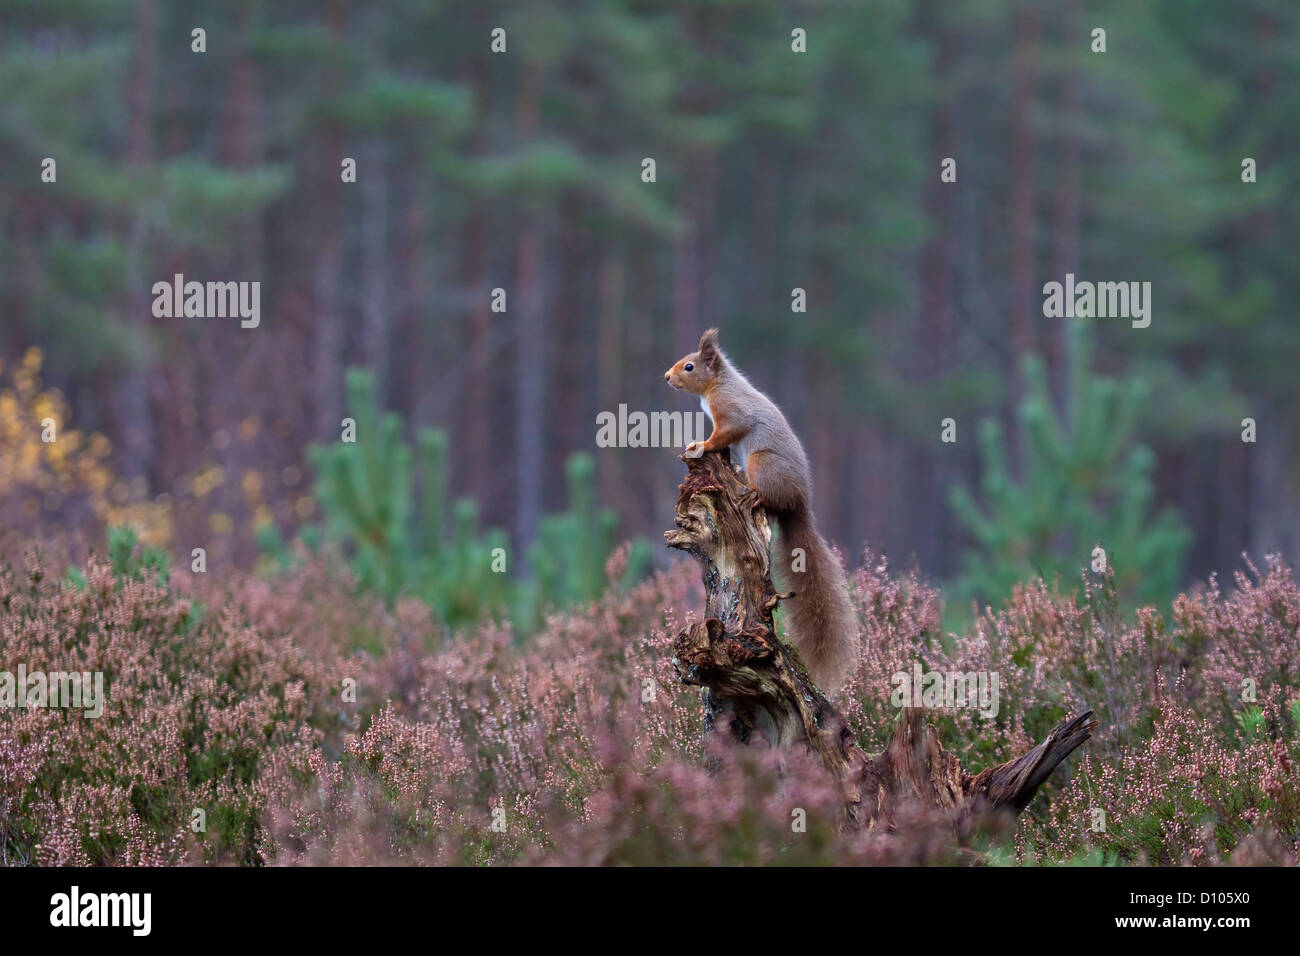 Red Squirrel Sciurus vulgaris perched on a tree stump surveying the surroundings in a Scottish pine forest Stock Photo